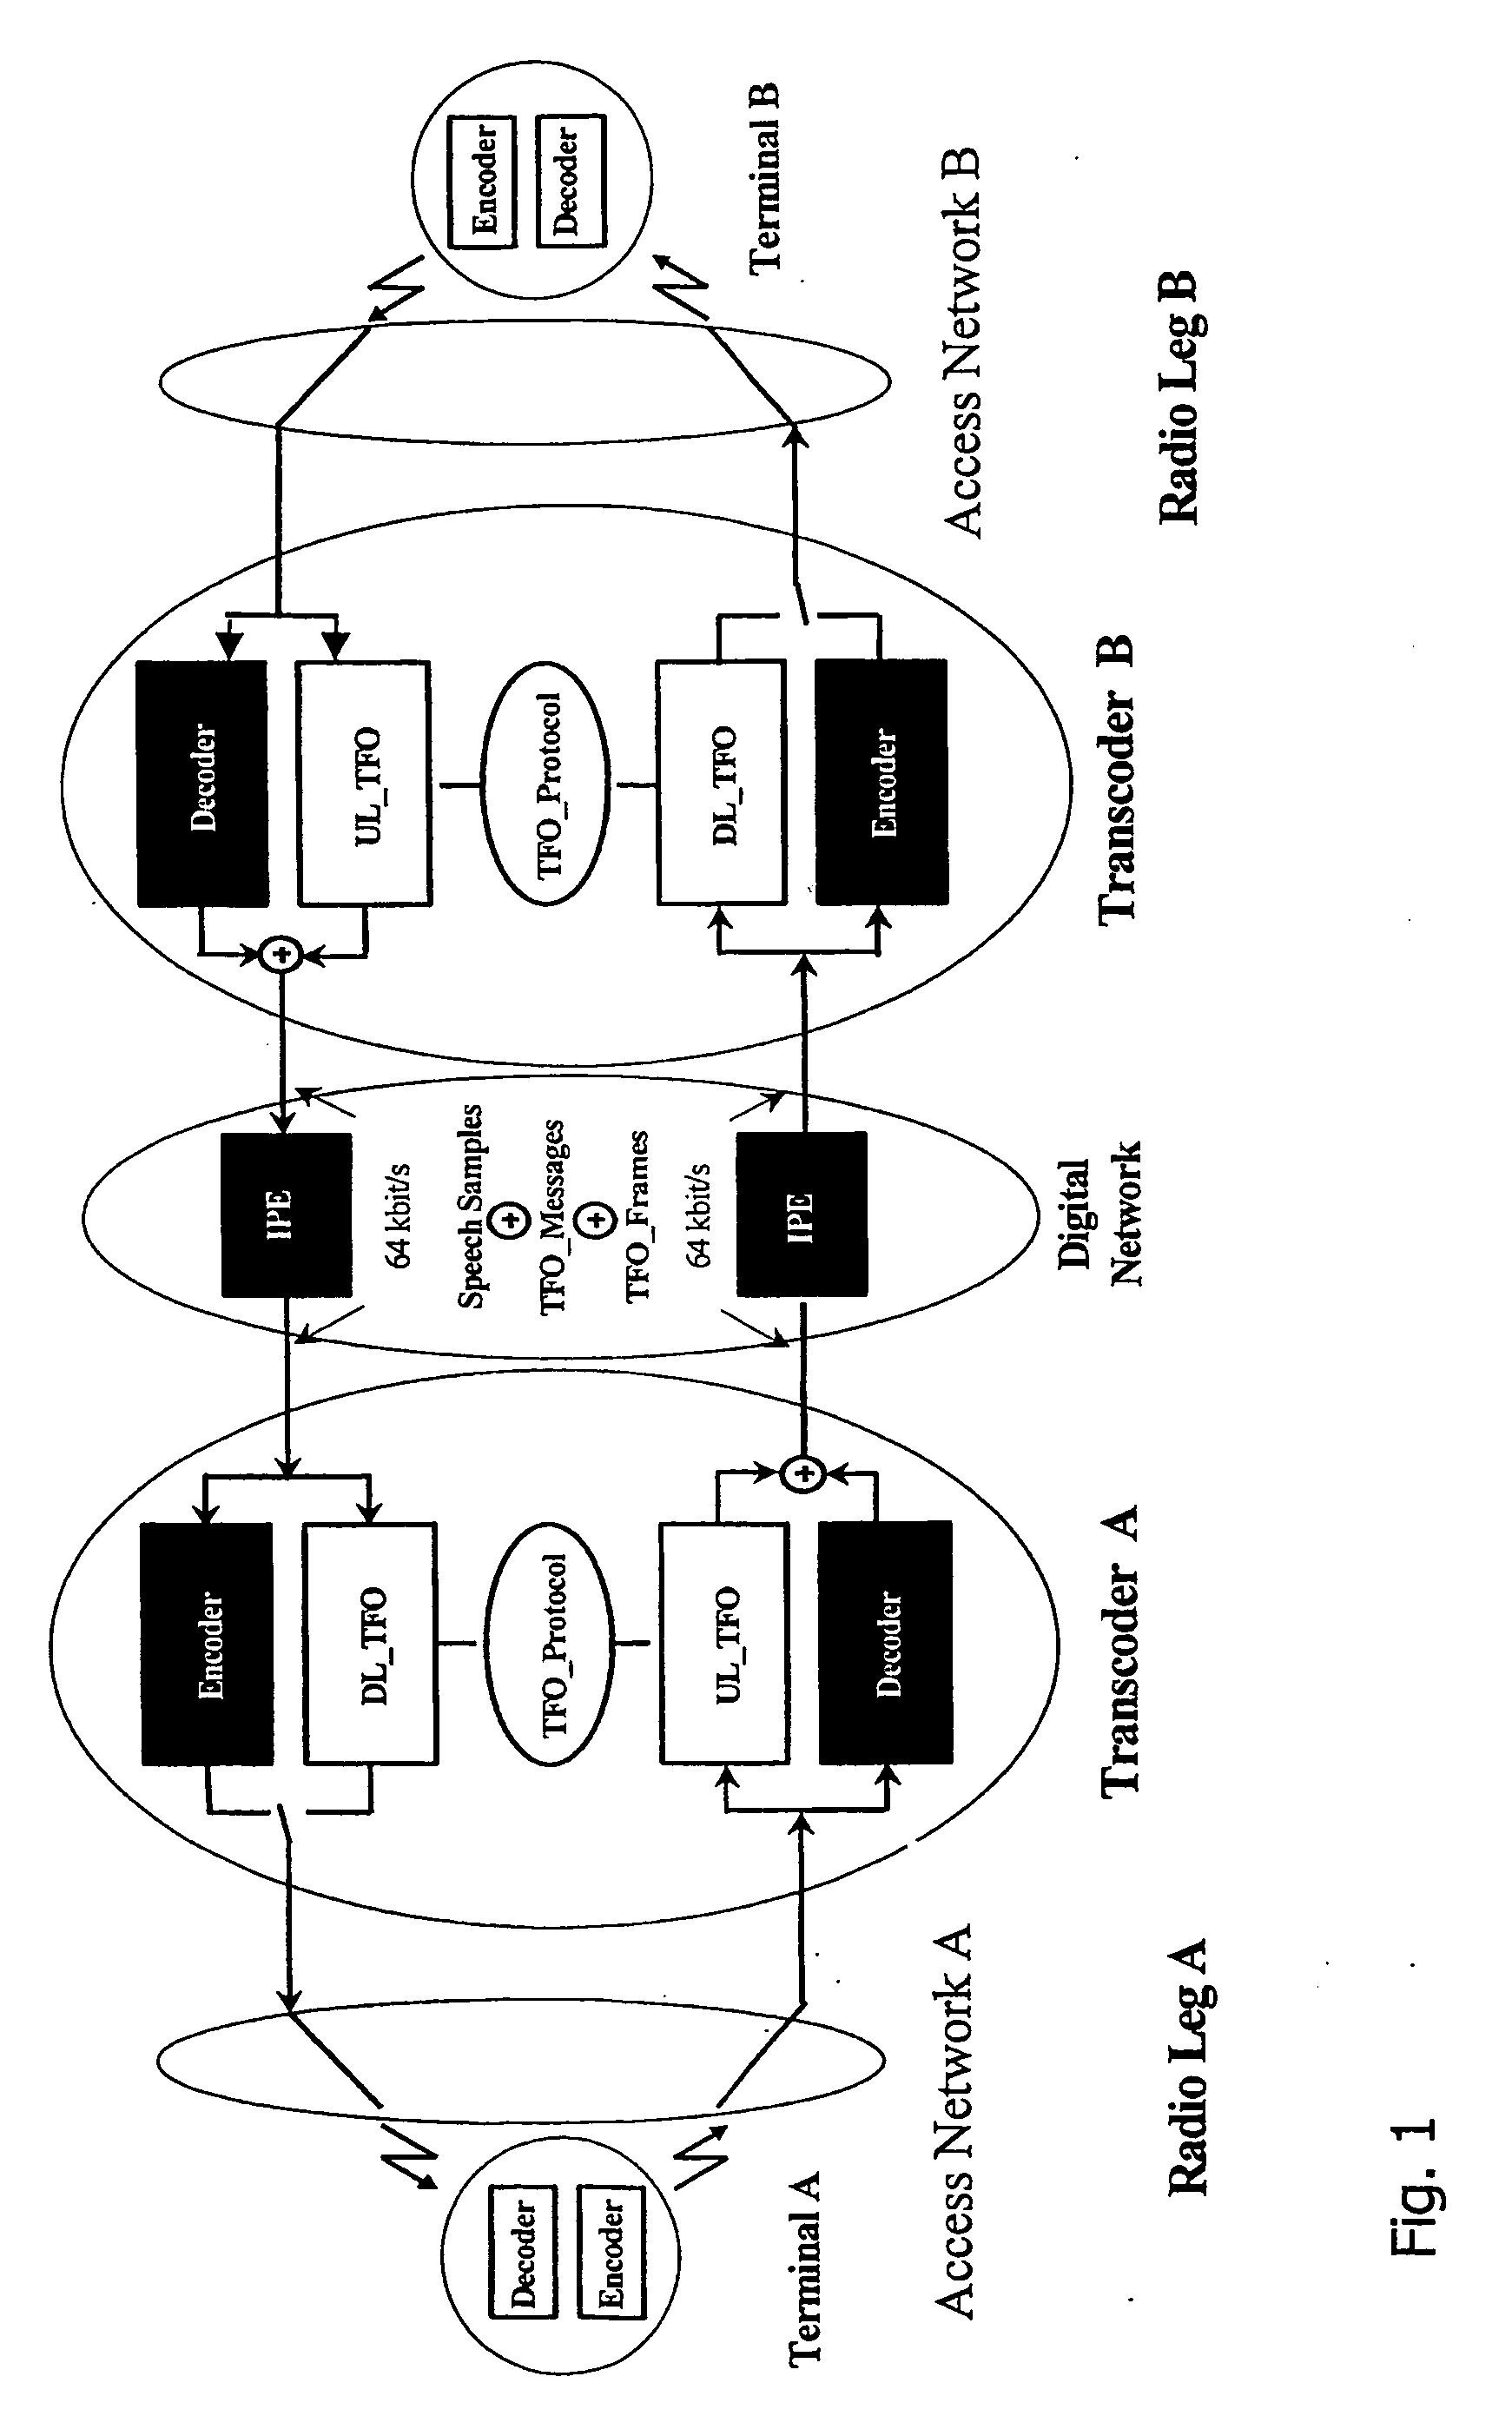 Bypassing transcoding operations in a communication network